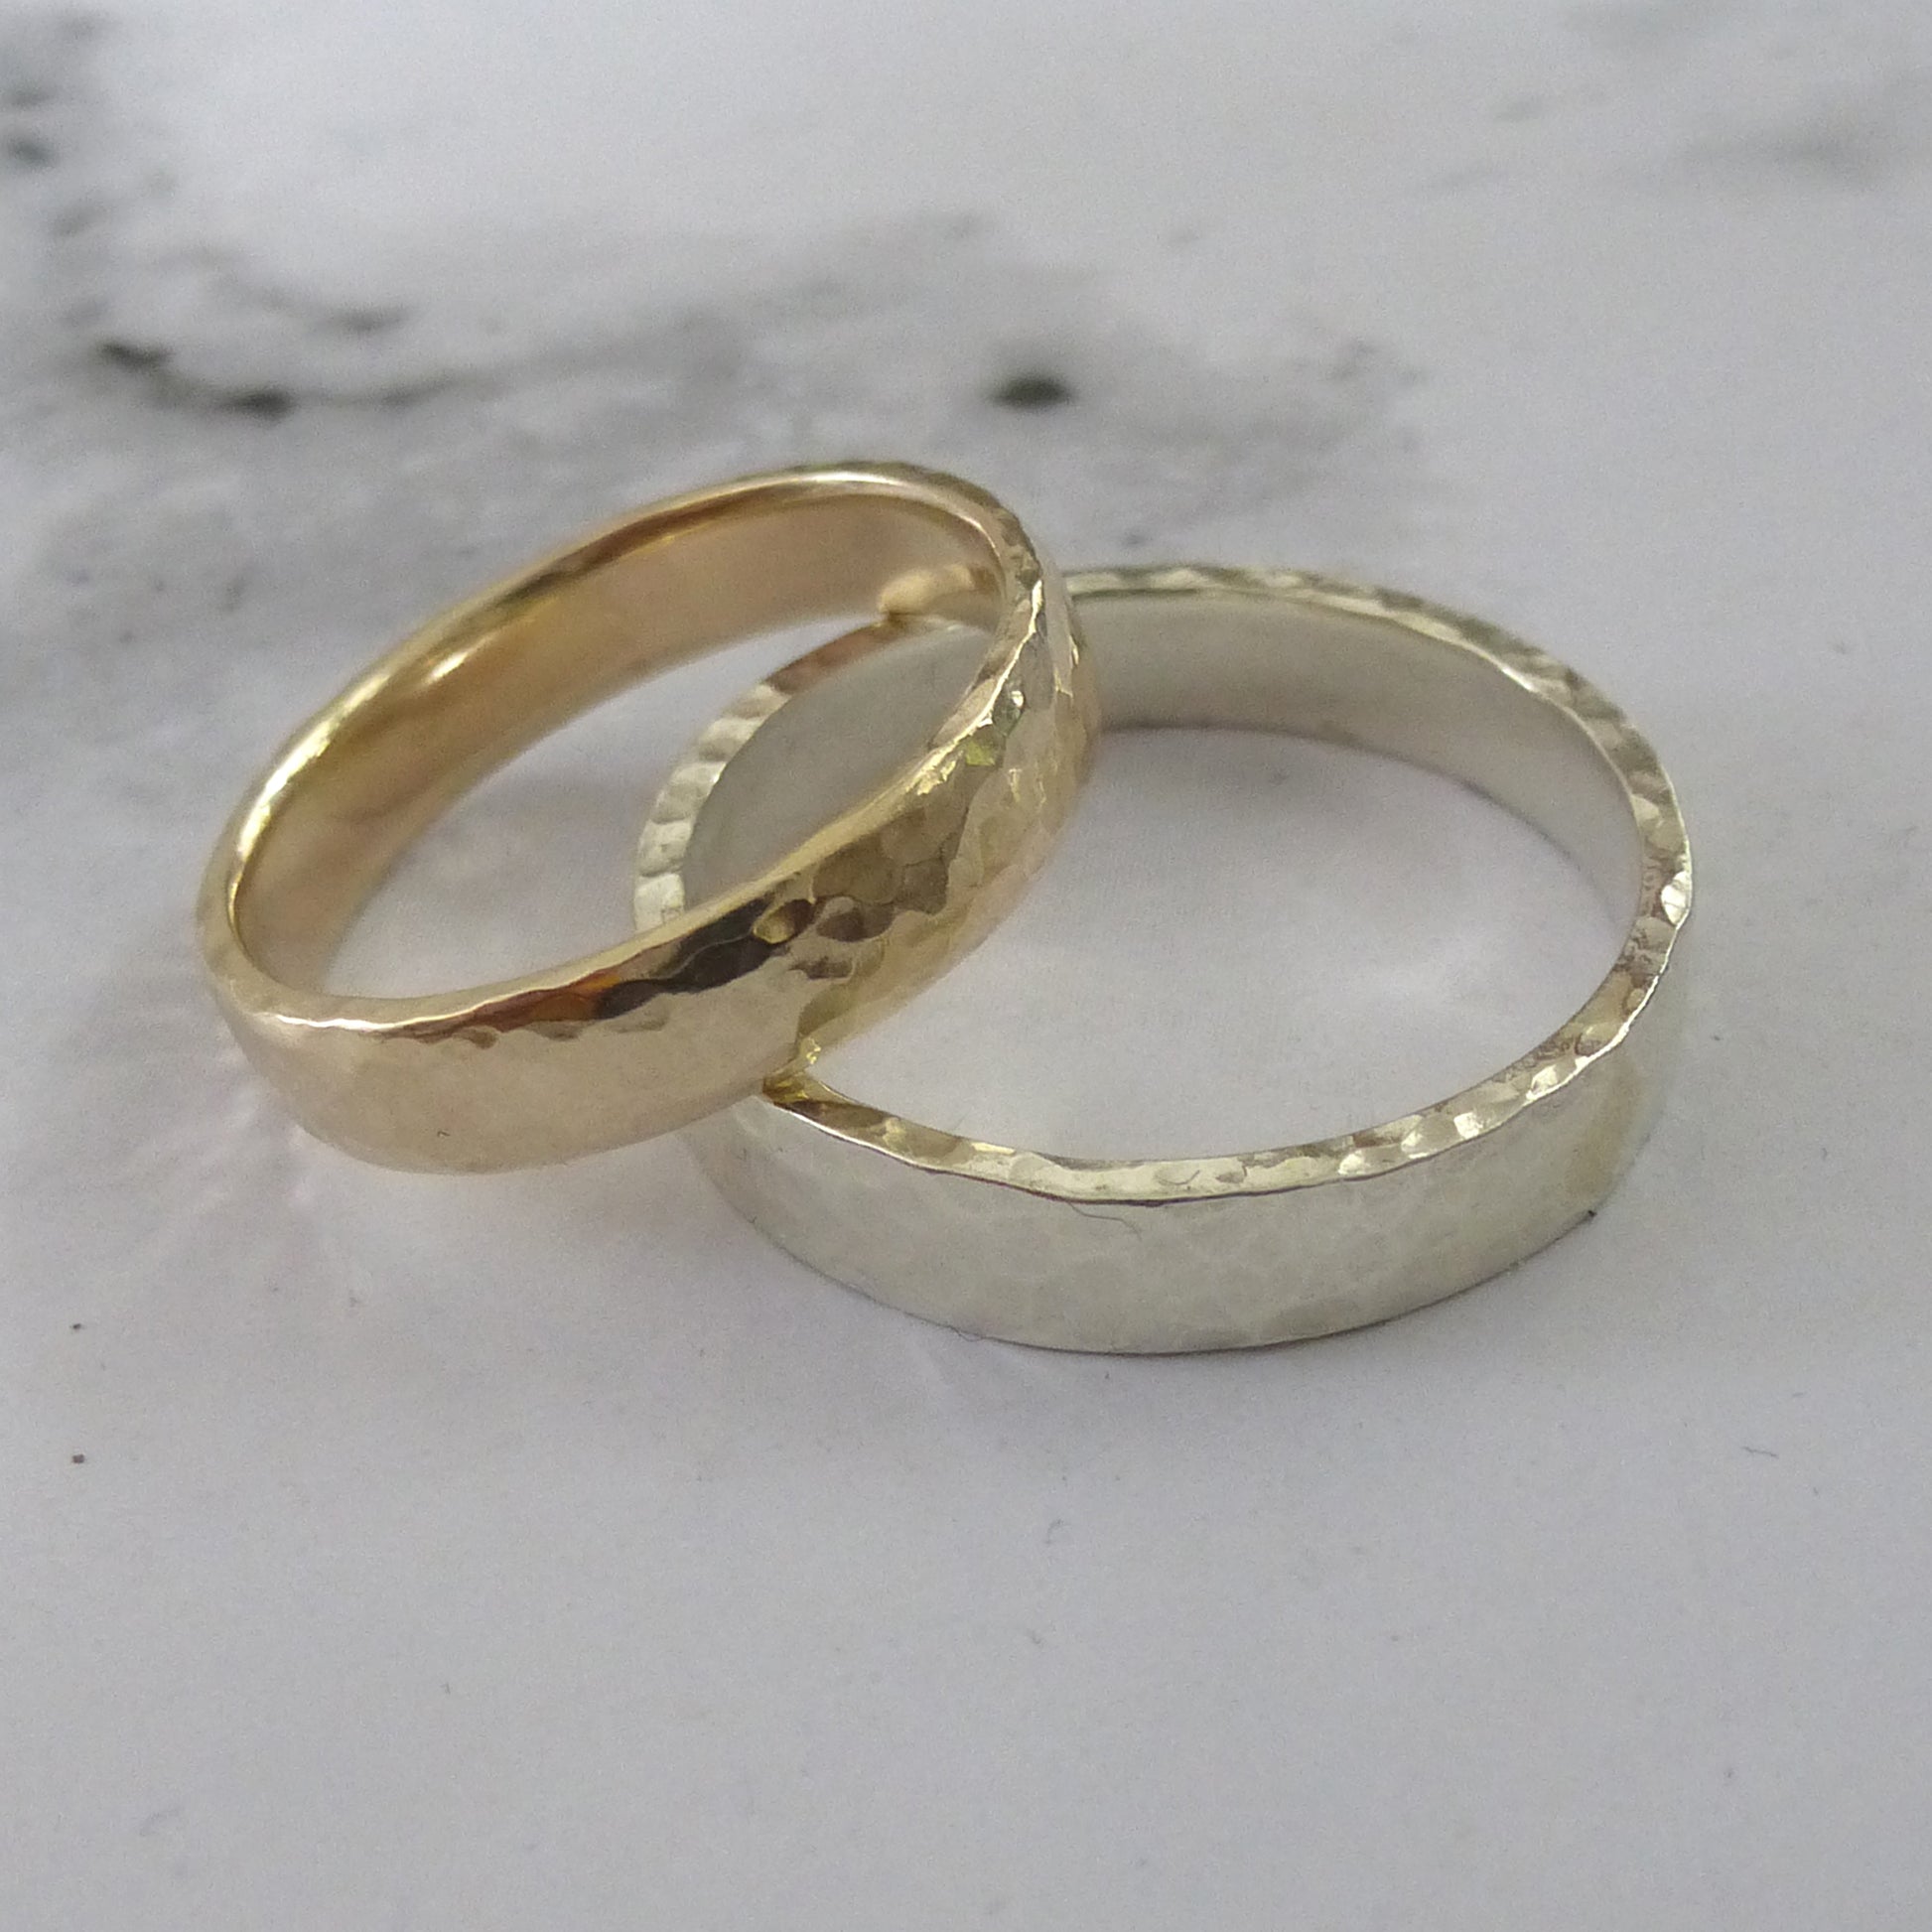 A pair of wedding band, 9ct gold, one a soft modern court, one with squarer edges